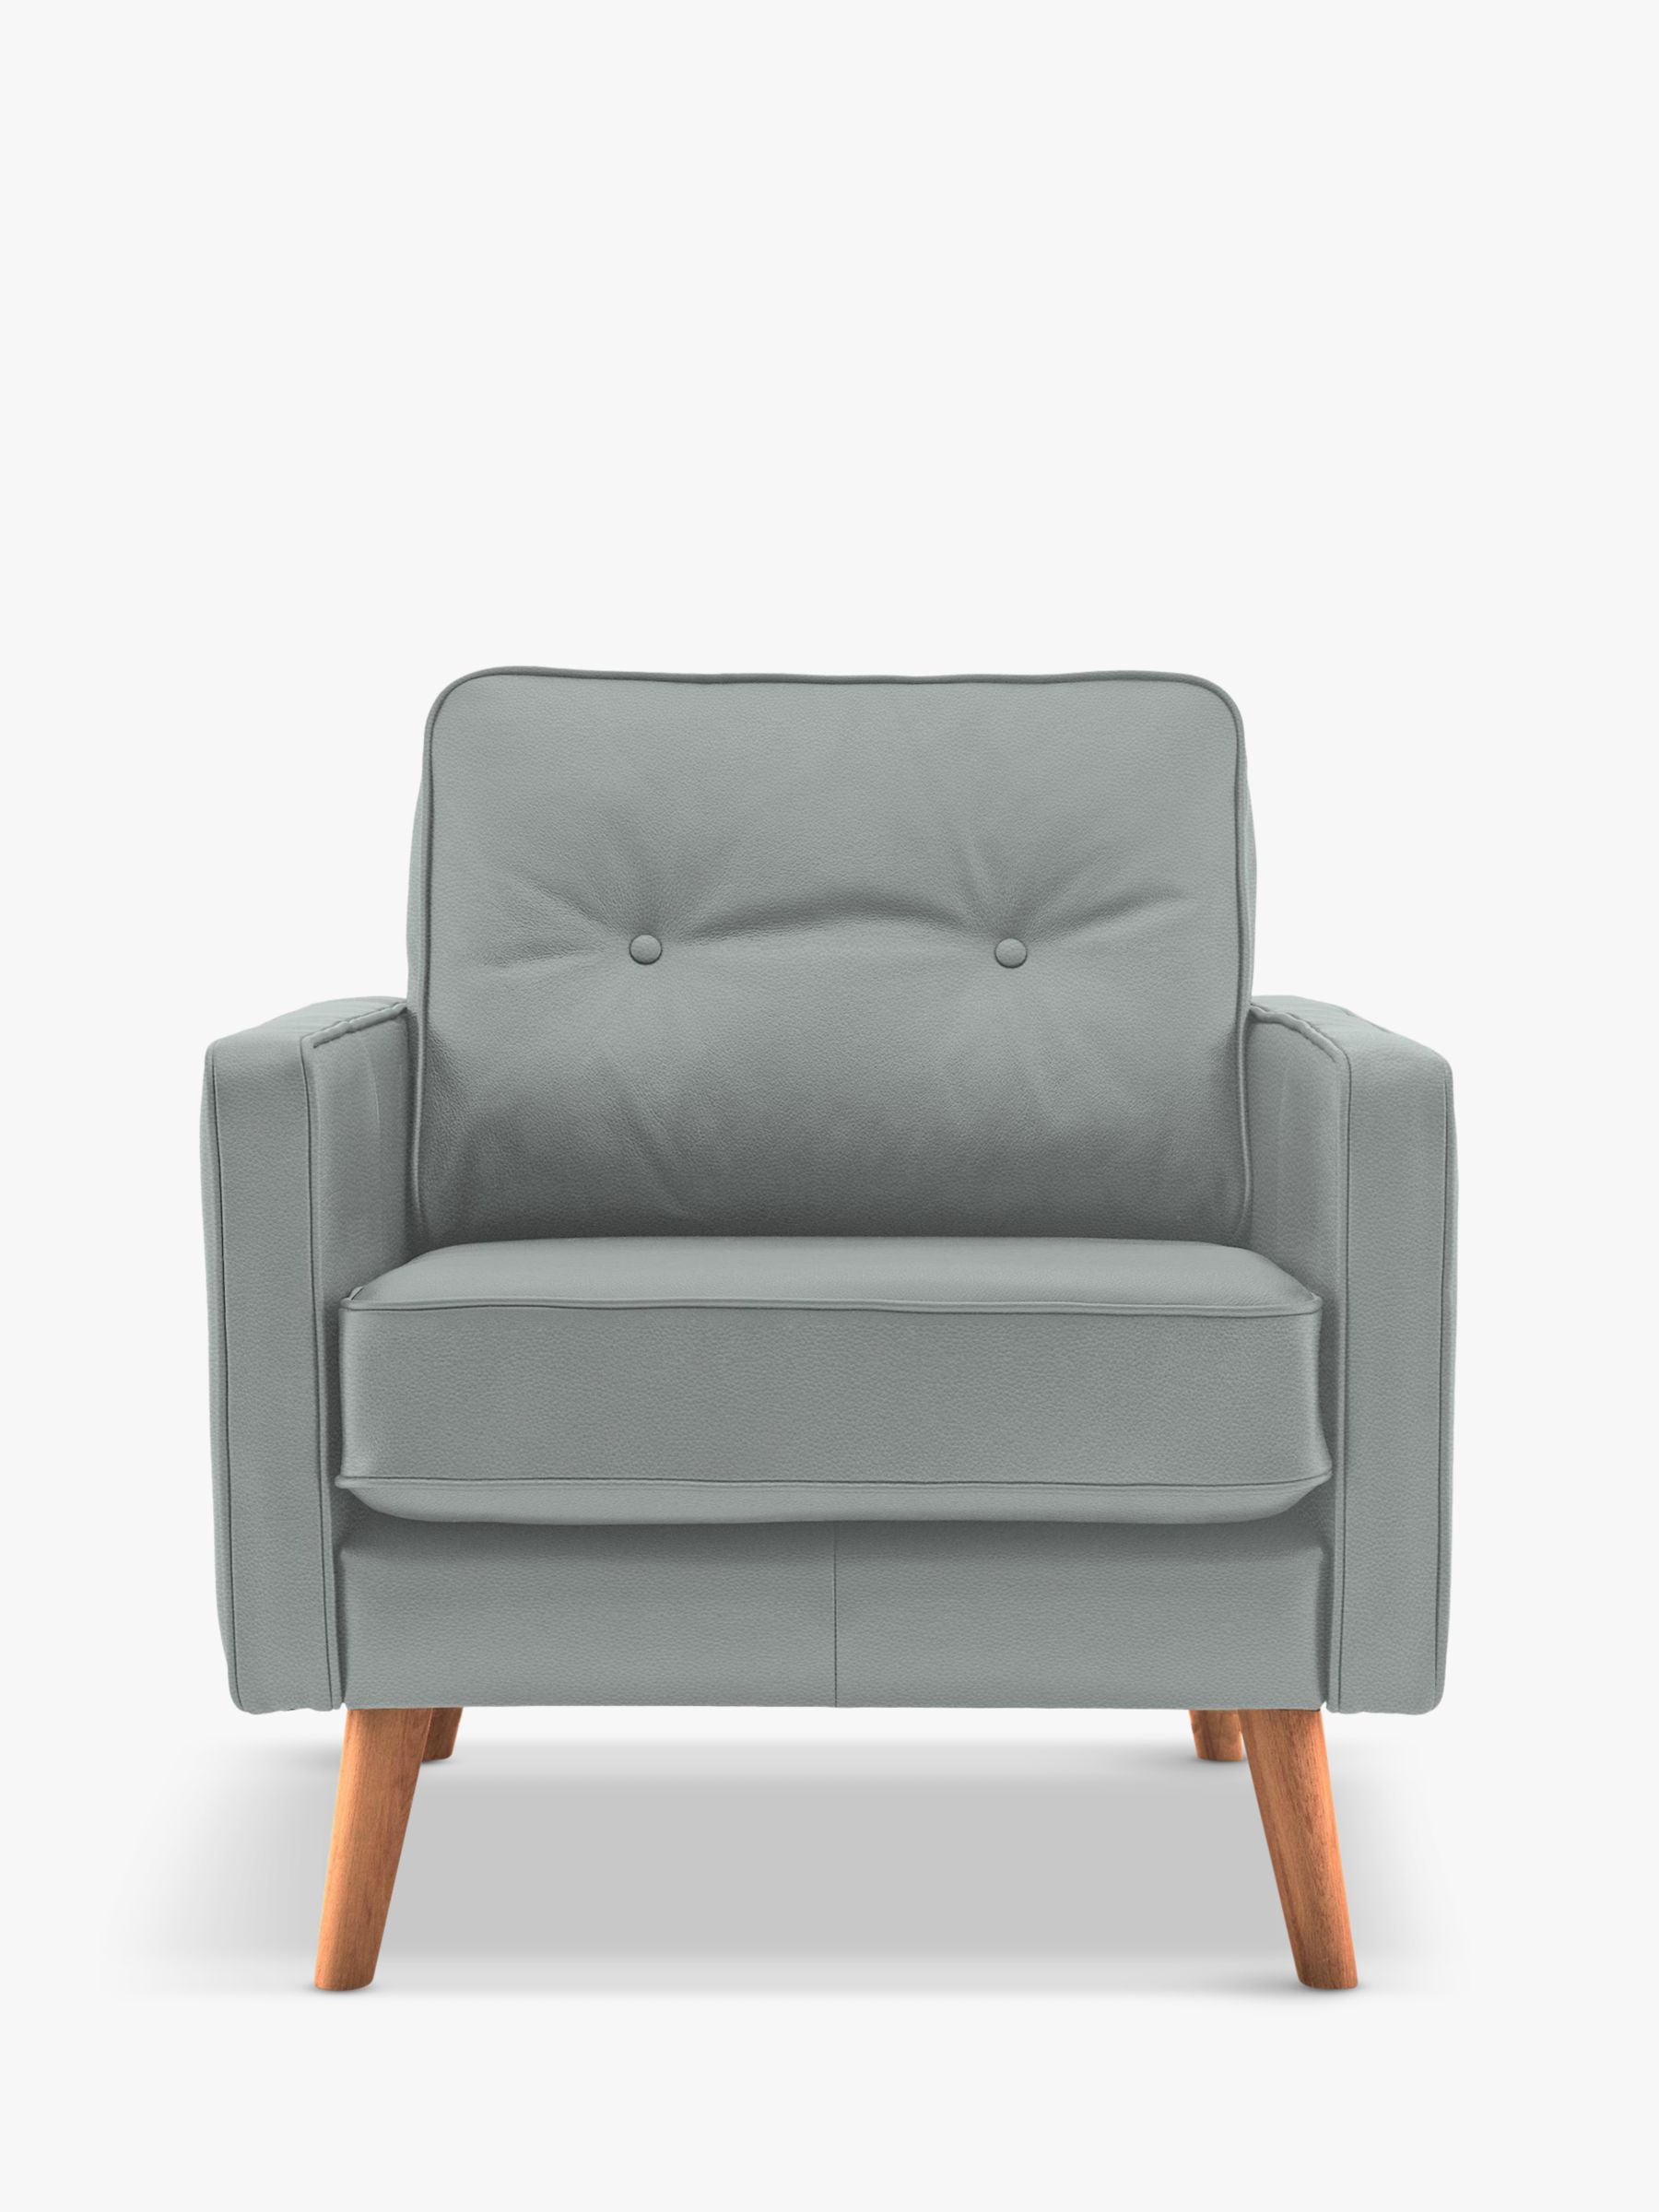 The Sixty Five Range, G Plan Vintage The Sixty Five Leather Armchair, Cambridge Grey